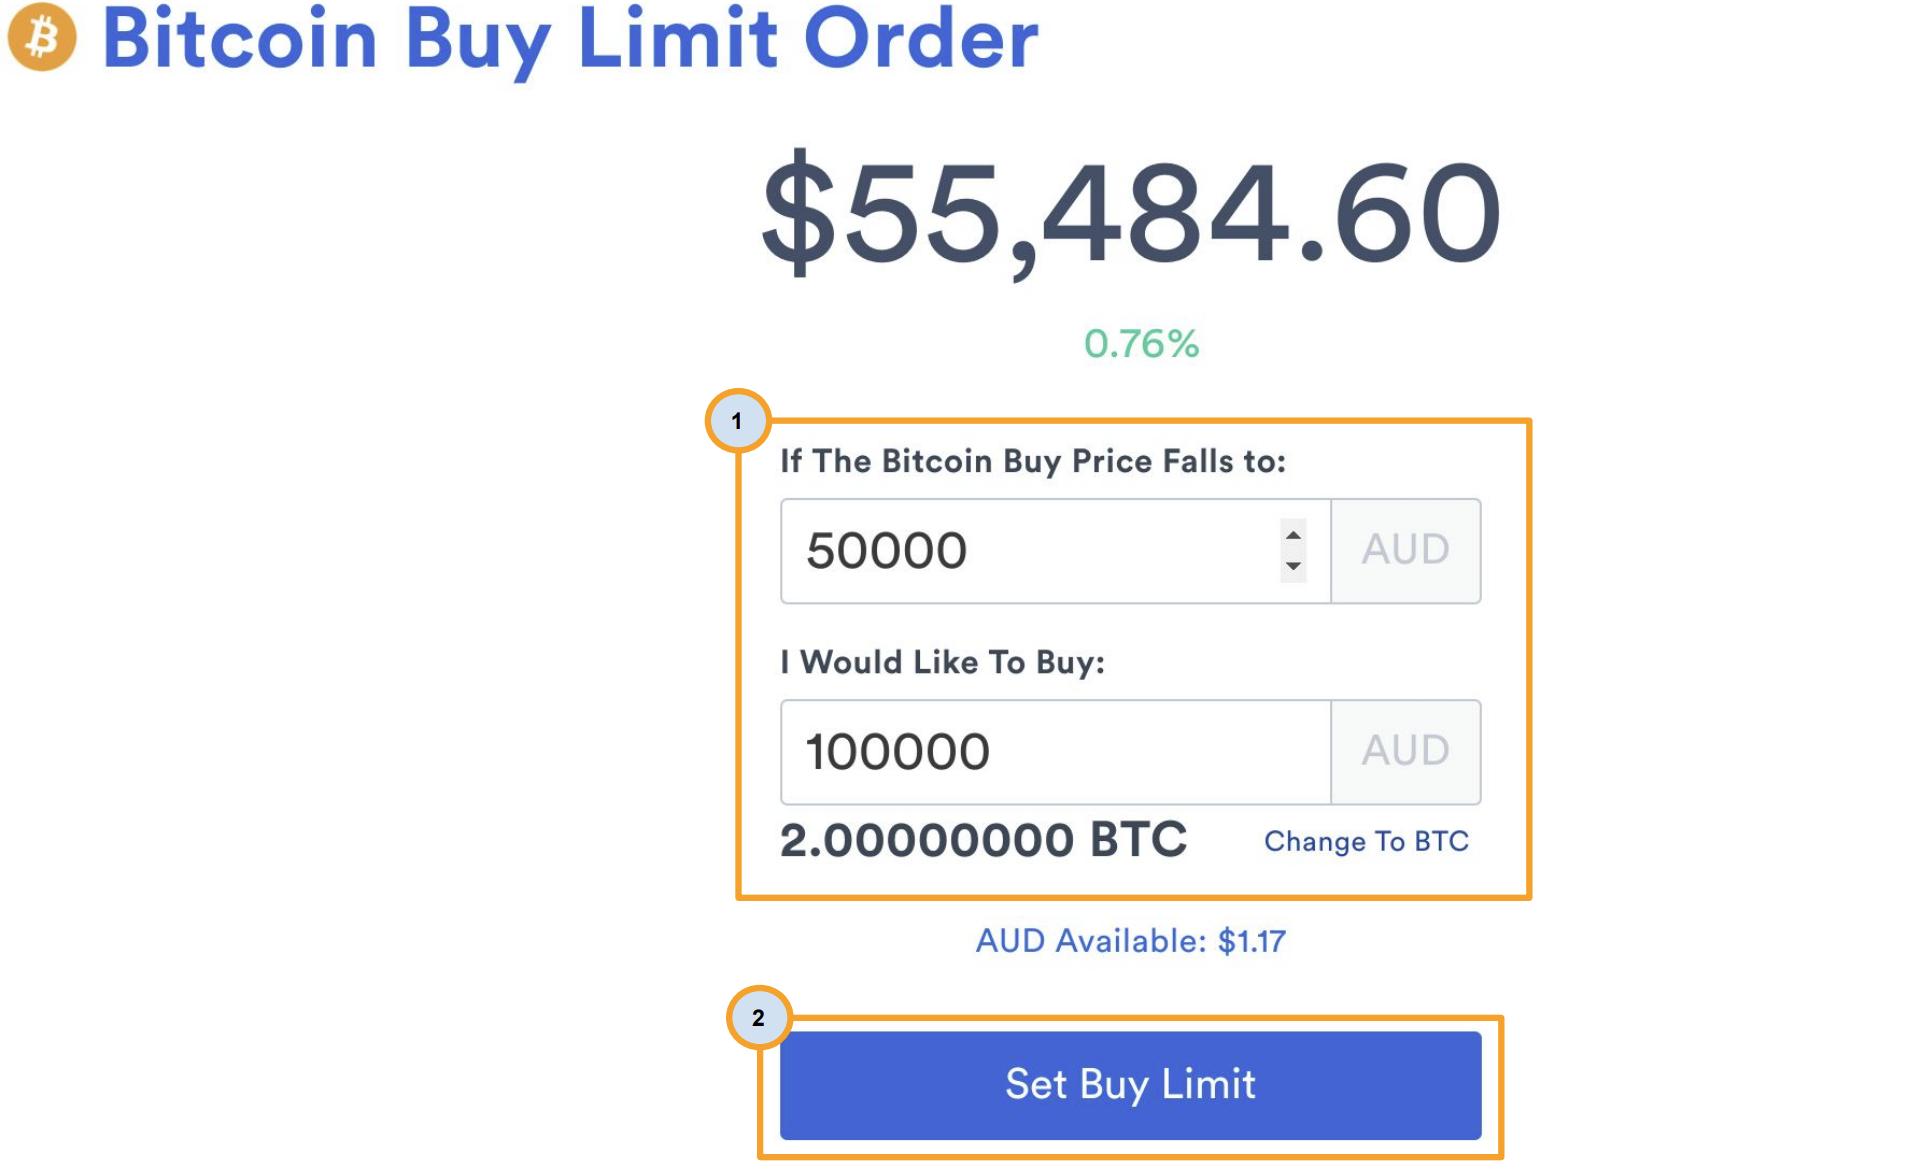 CoinSpot_BTC_Buy_Limit_Example.png